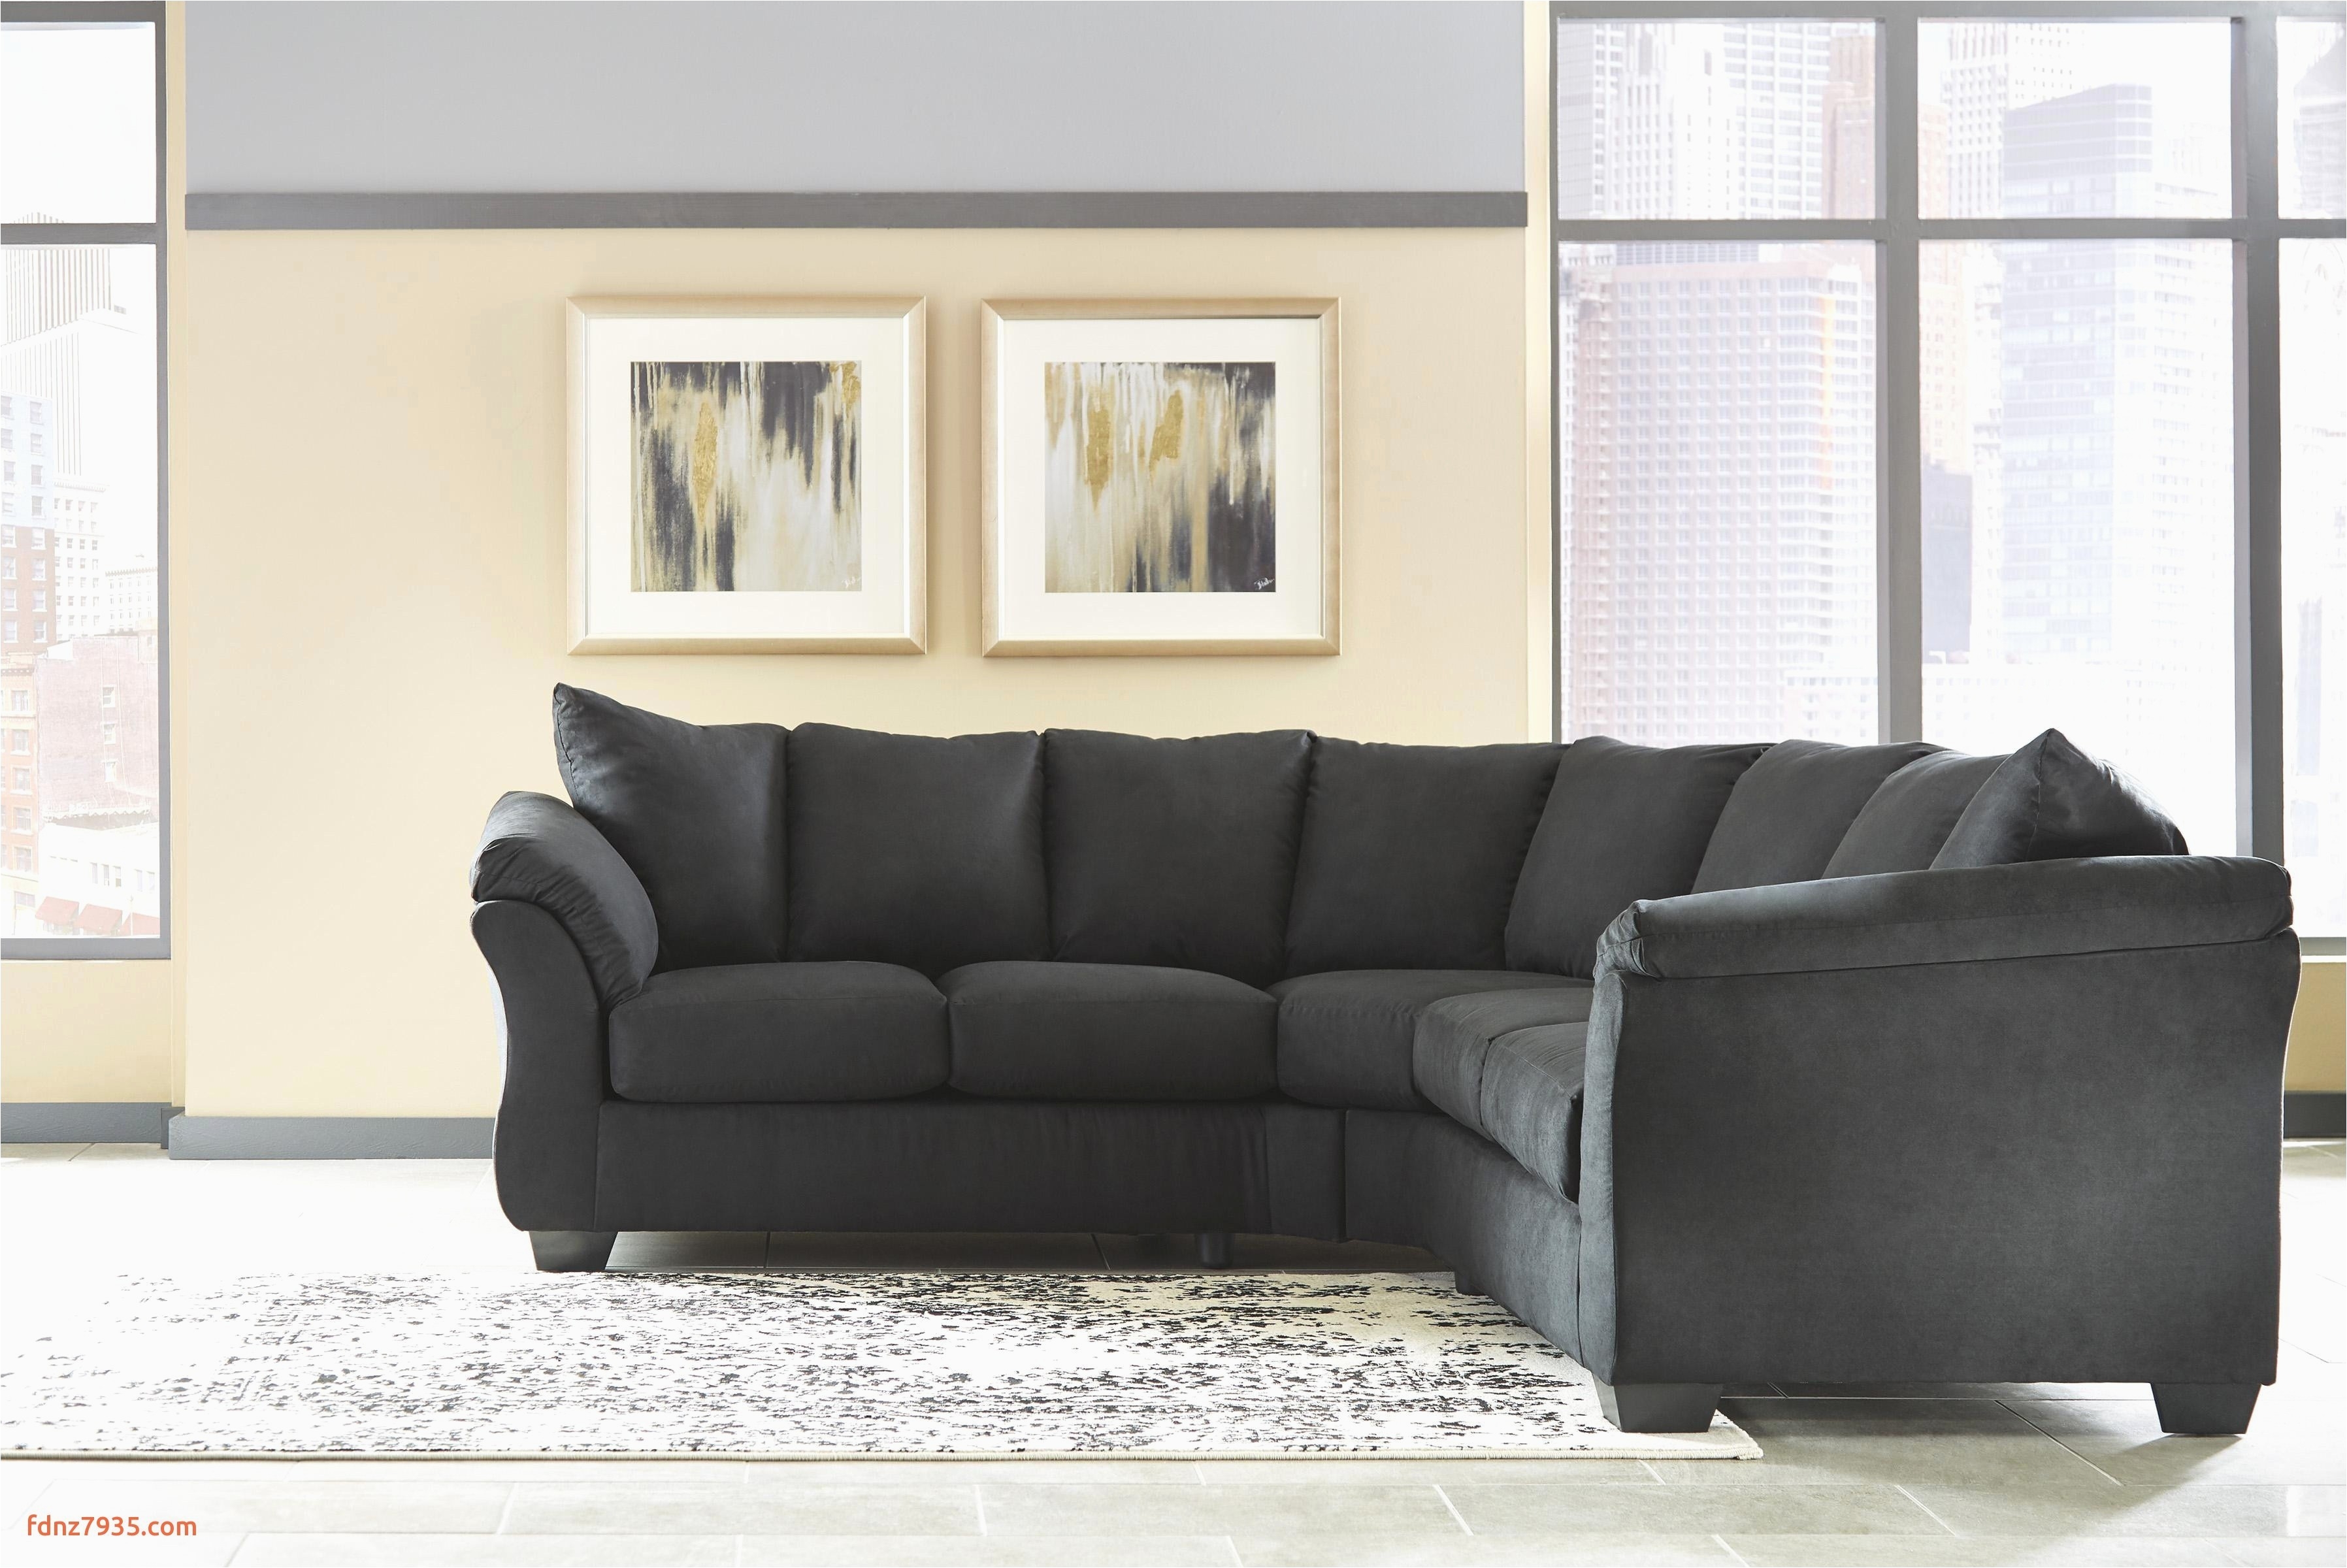 living room couches luxury living room ideas with sectional sofas luxury sectional couch 0d sectional